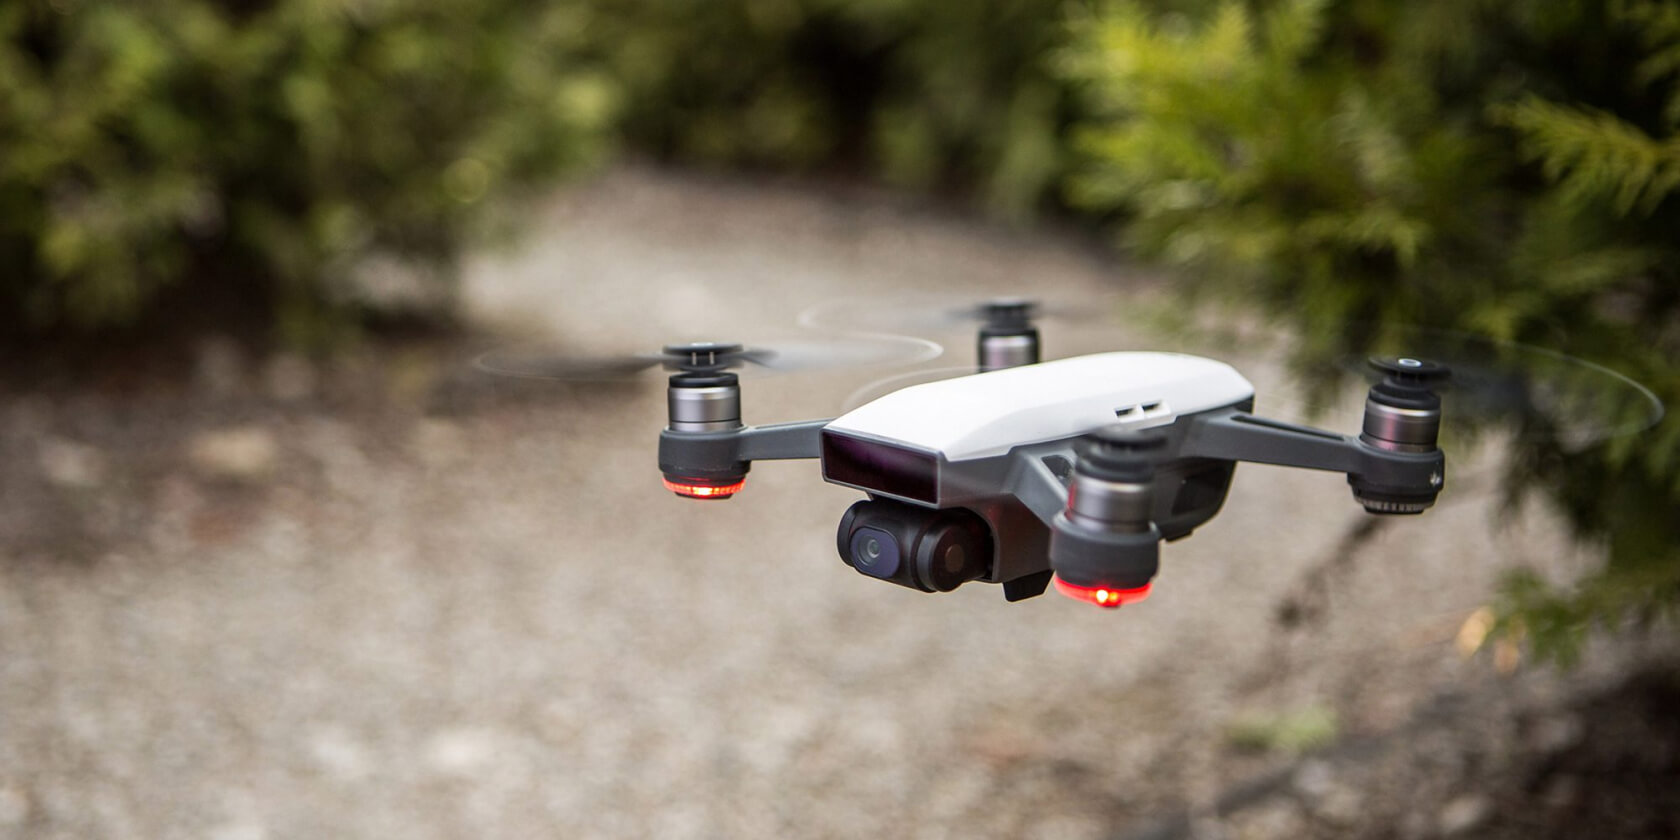 TechSpot + Wellbots giveaway: Win a DJI Spark drone and a BB-8 droid